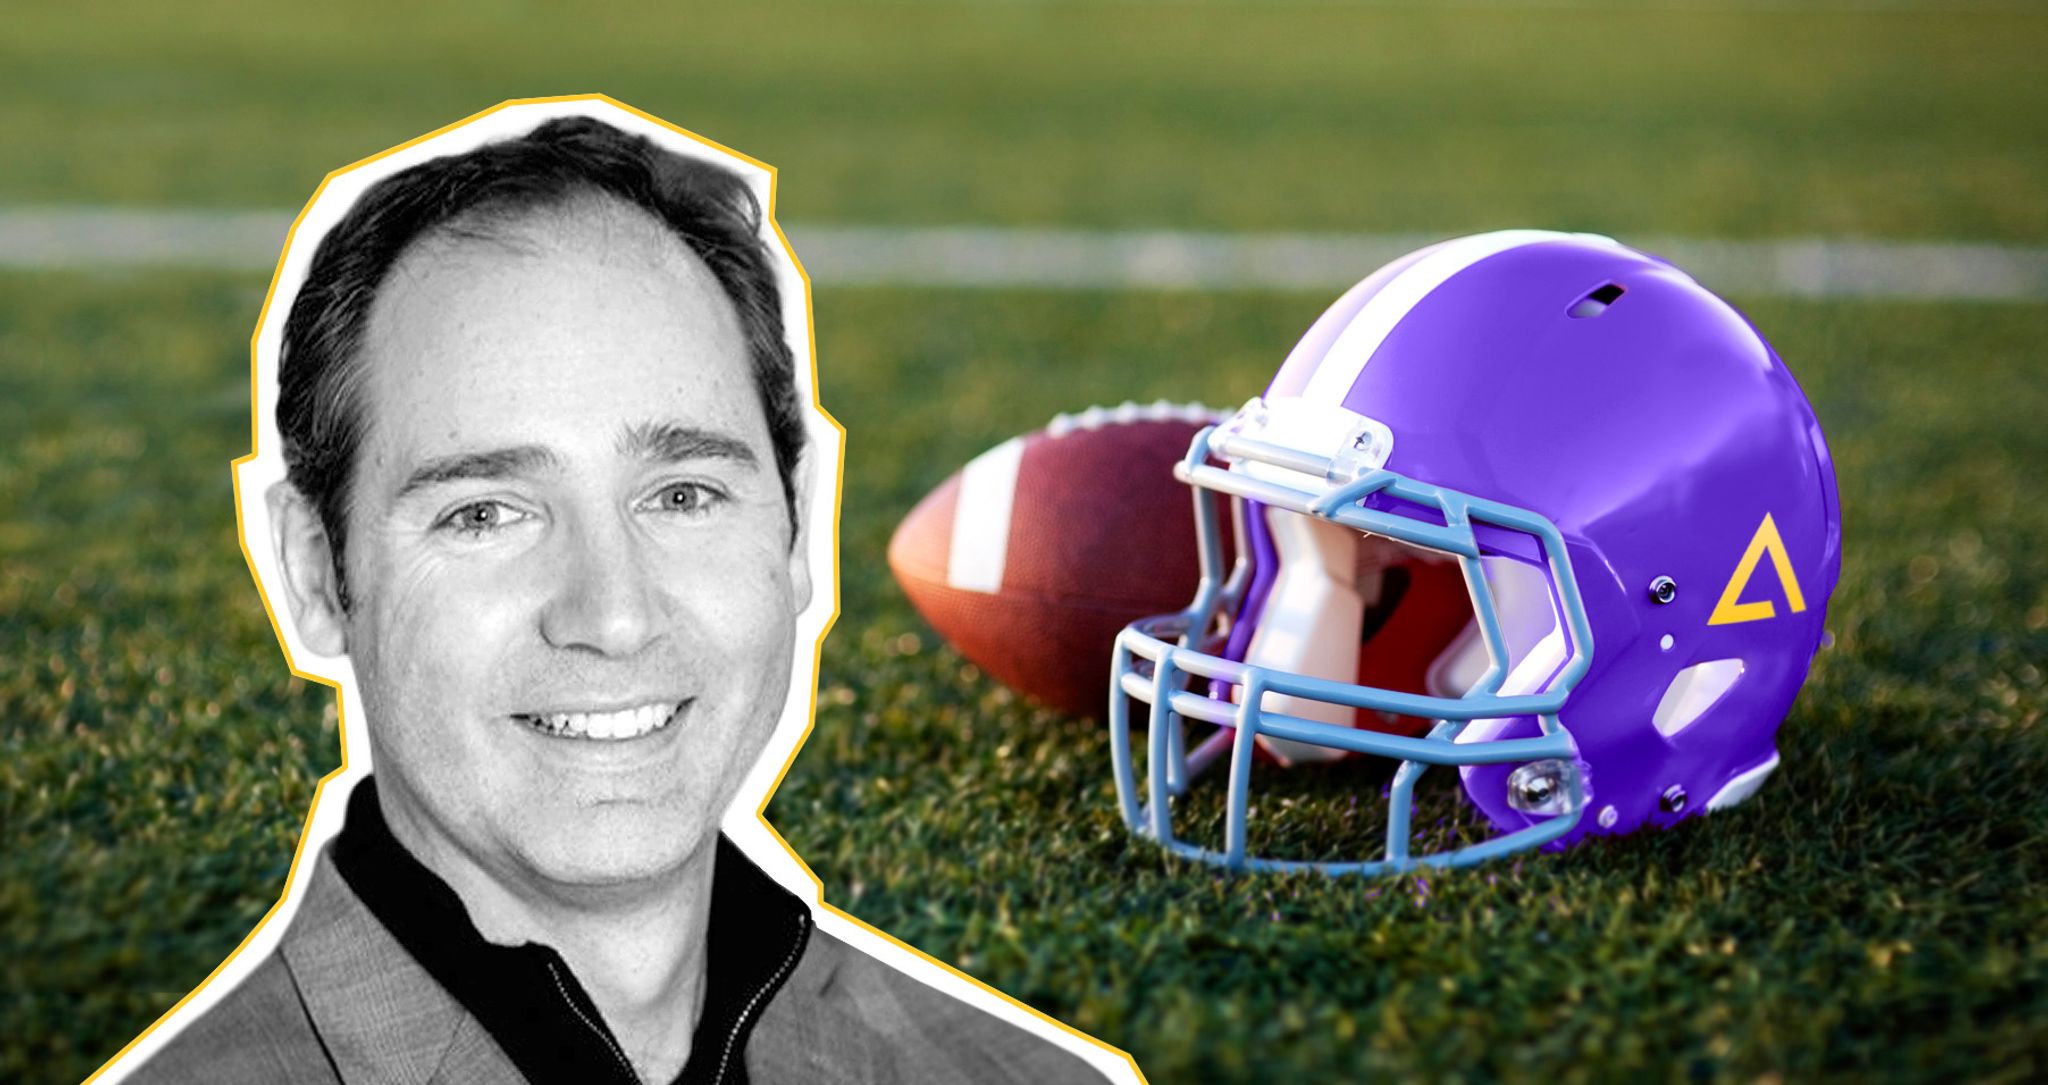 Joel Varty headshot against an image of an American football next to a football helmet with the Agility logo on the side.